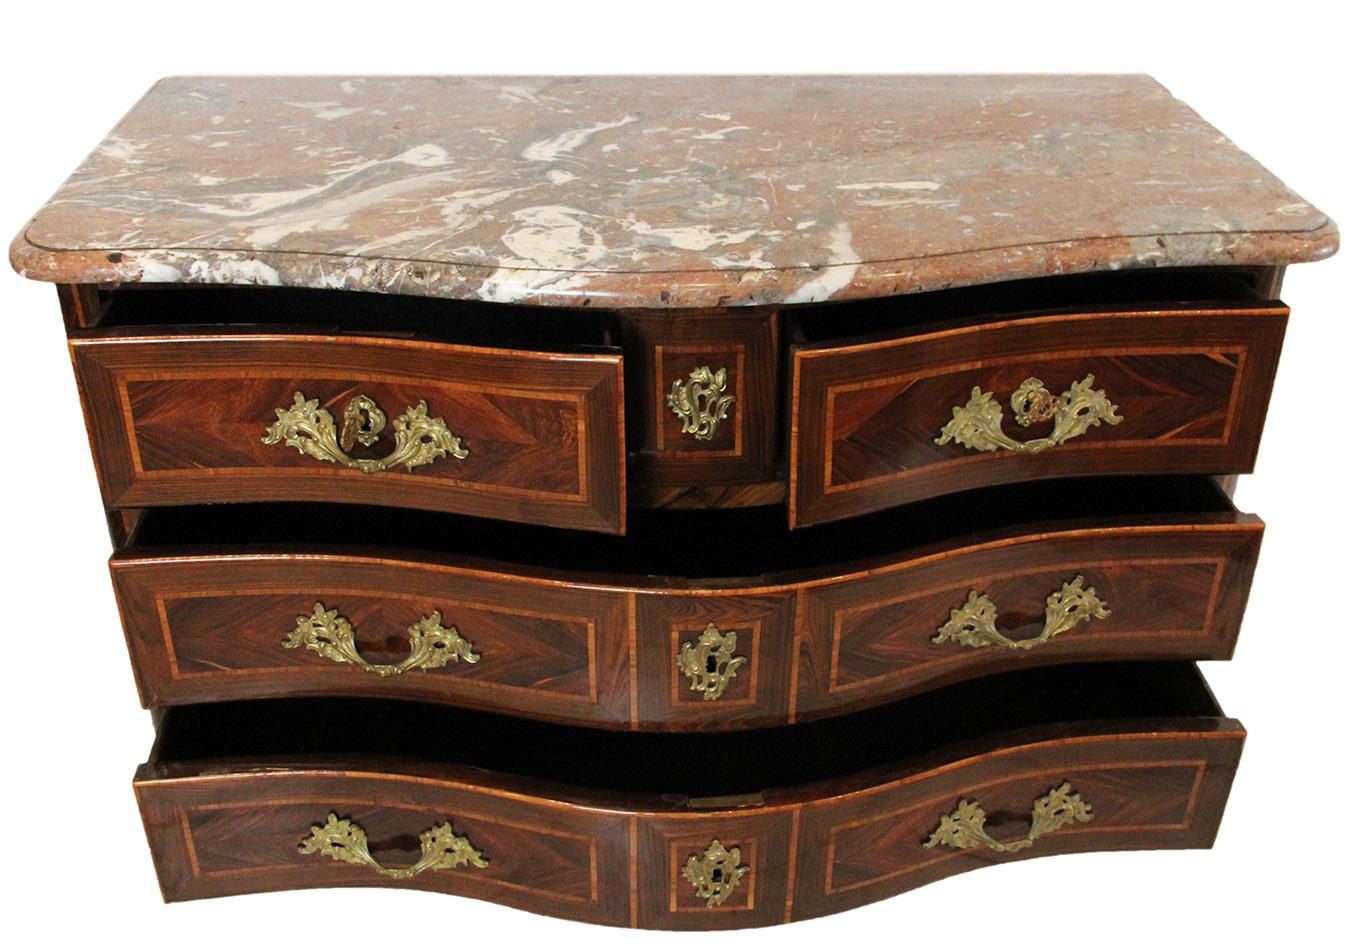 18th century commode or chest of drawers Stamped Jean Charles ELLAUME with veined marble top
Beautiful chest of drawers with a curved front opening to 4 drawers on 3 rows and bearing a double stamp.
Two stamps of Jean-Charles ELLAUME, received